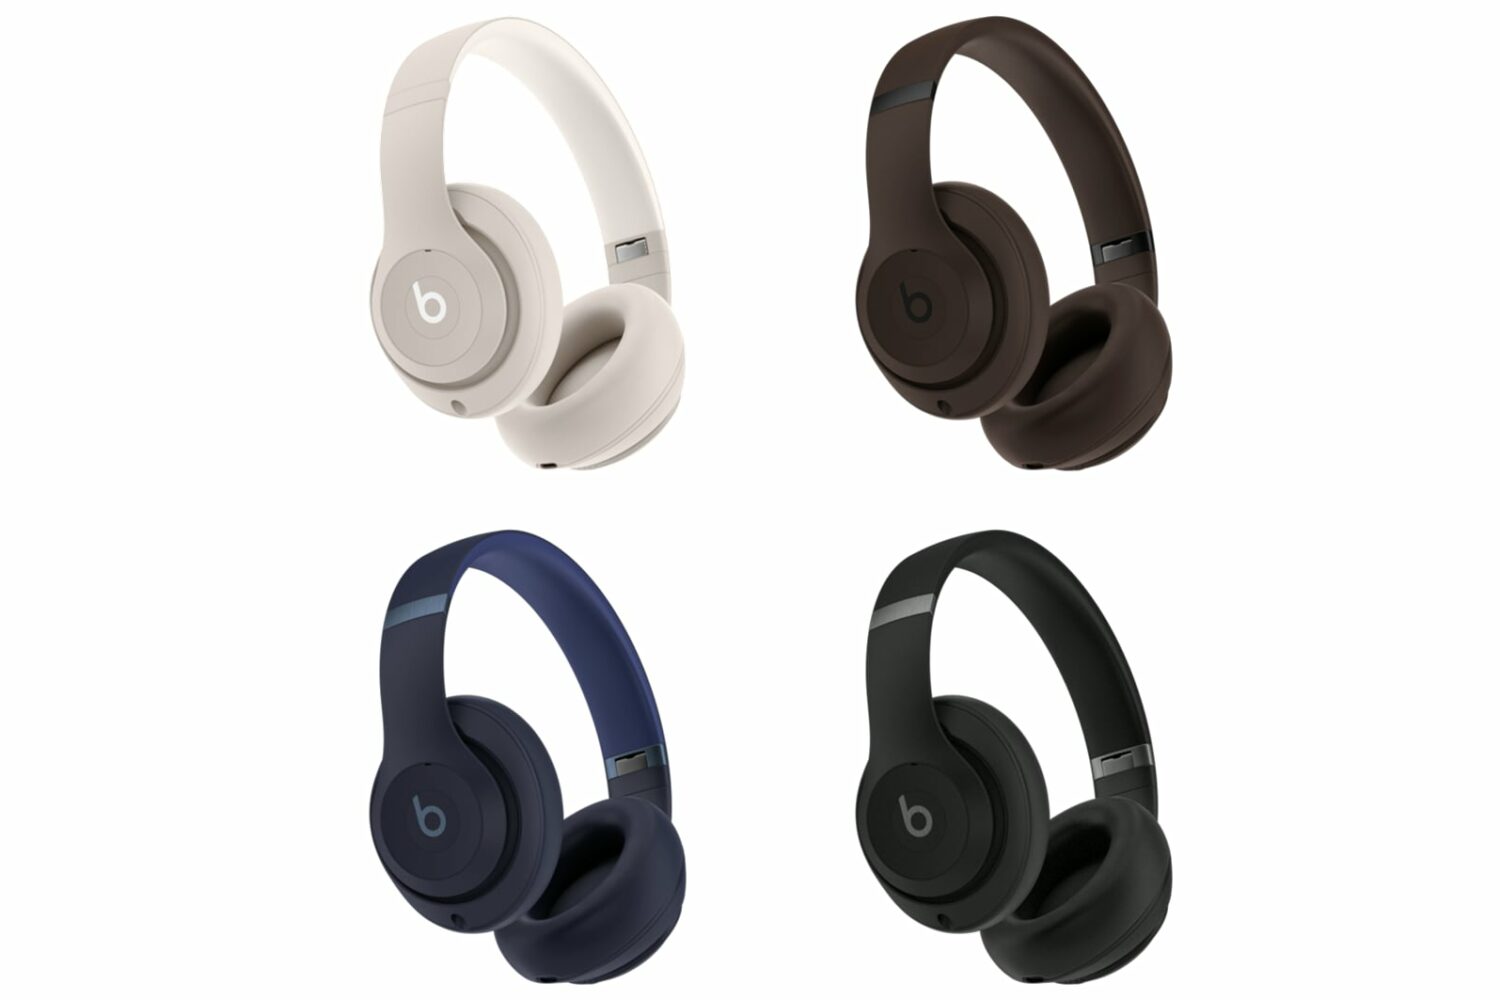 Four Beats Studio Pro over-ear headphones in white, brown, dark blue and black, set against a white background